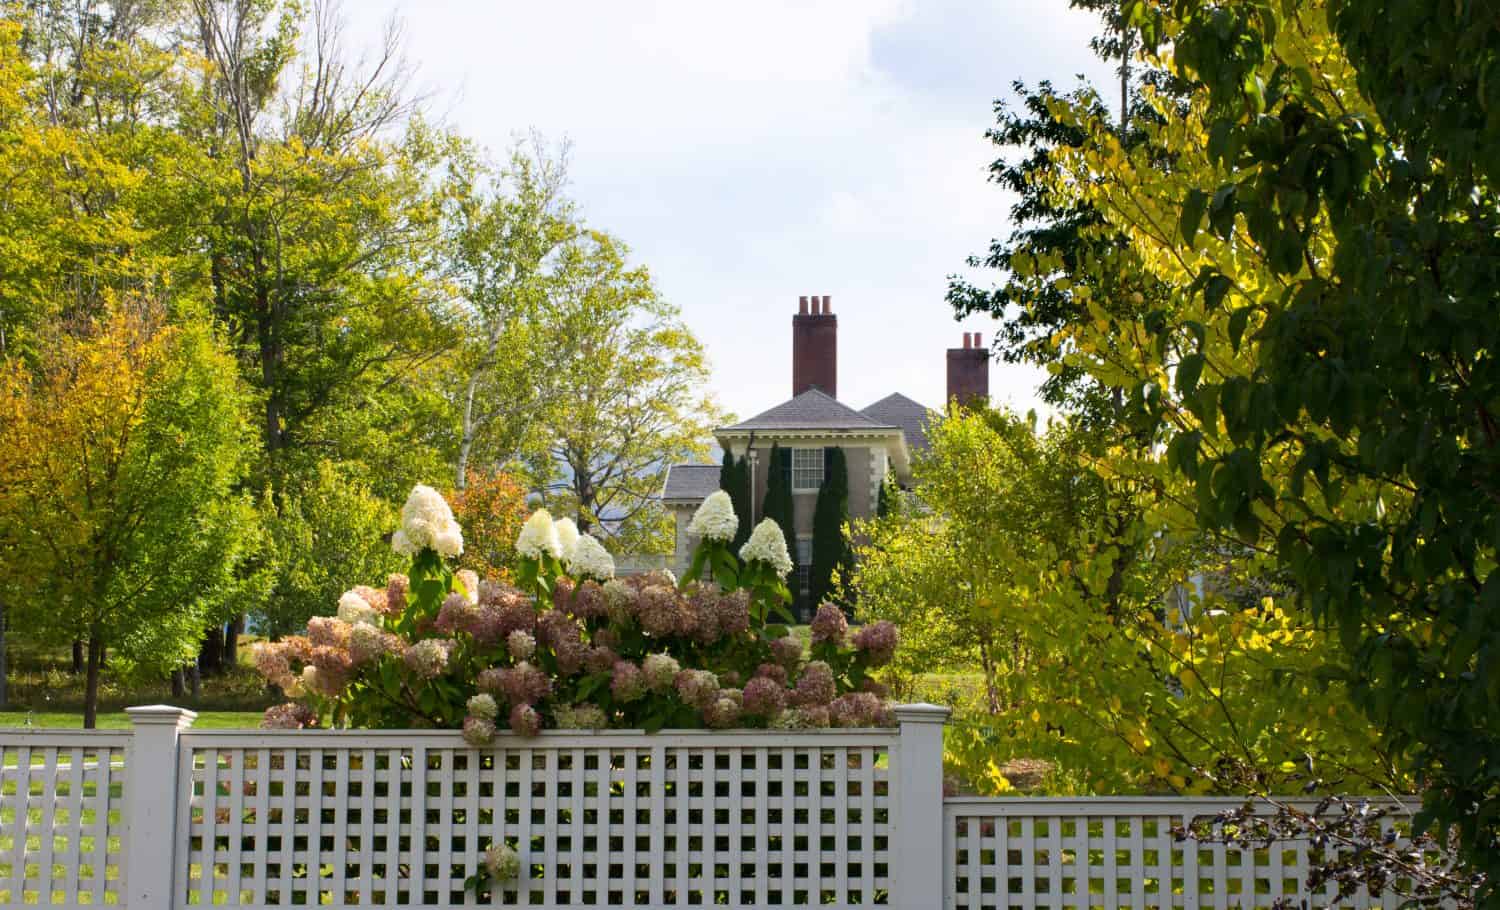 A blooming hydrangea bush with a partial view of the Hildene mansion in the background. Fall foliage is present.